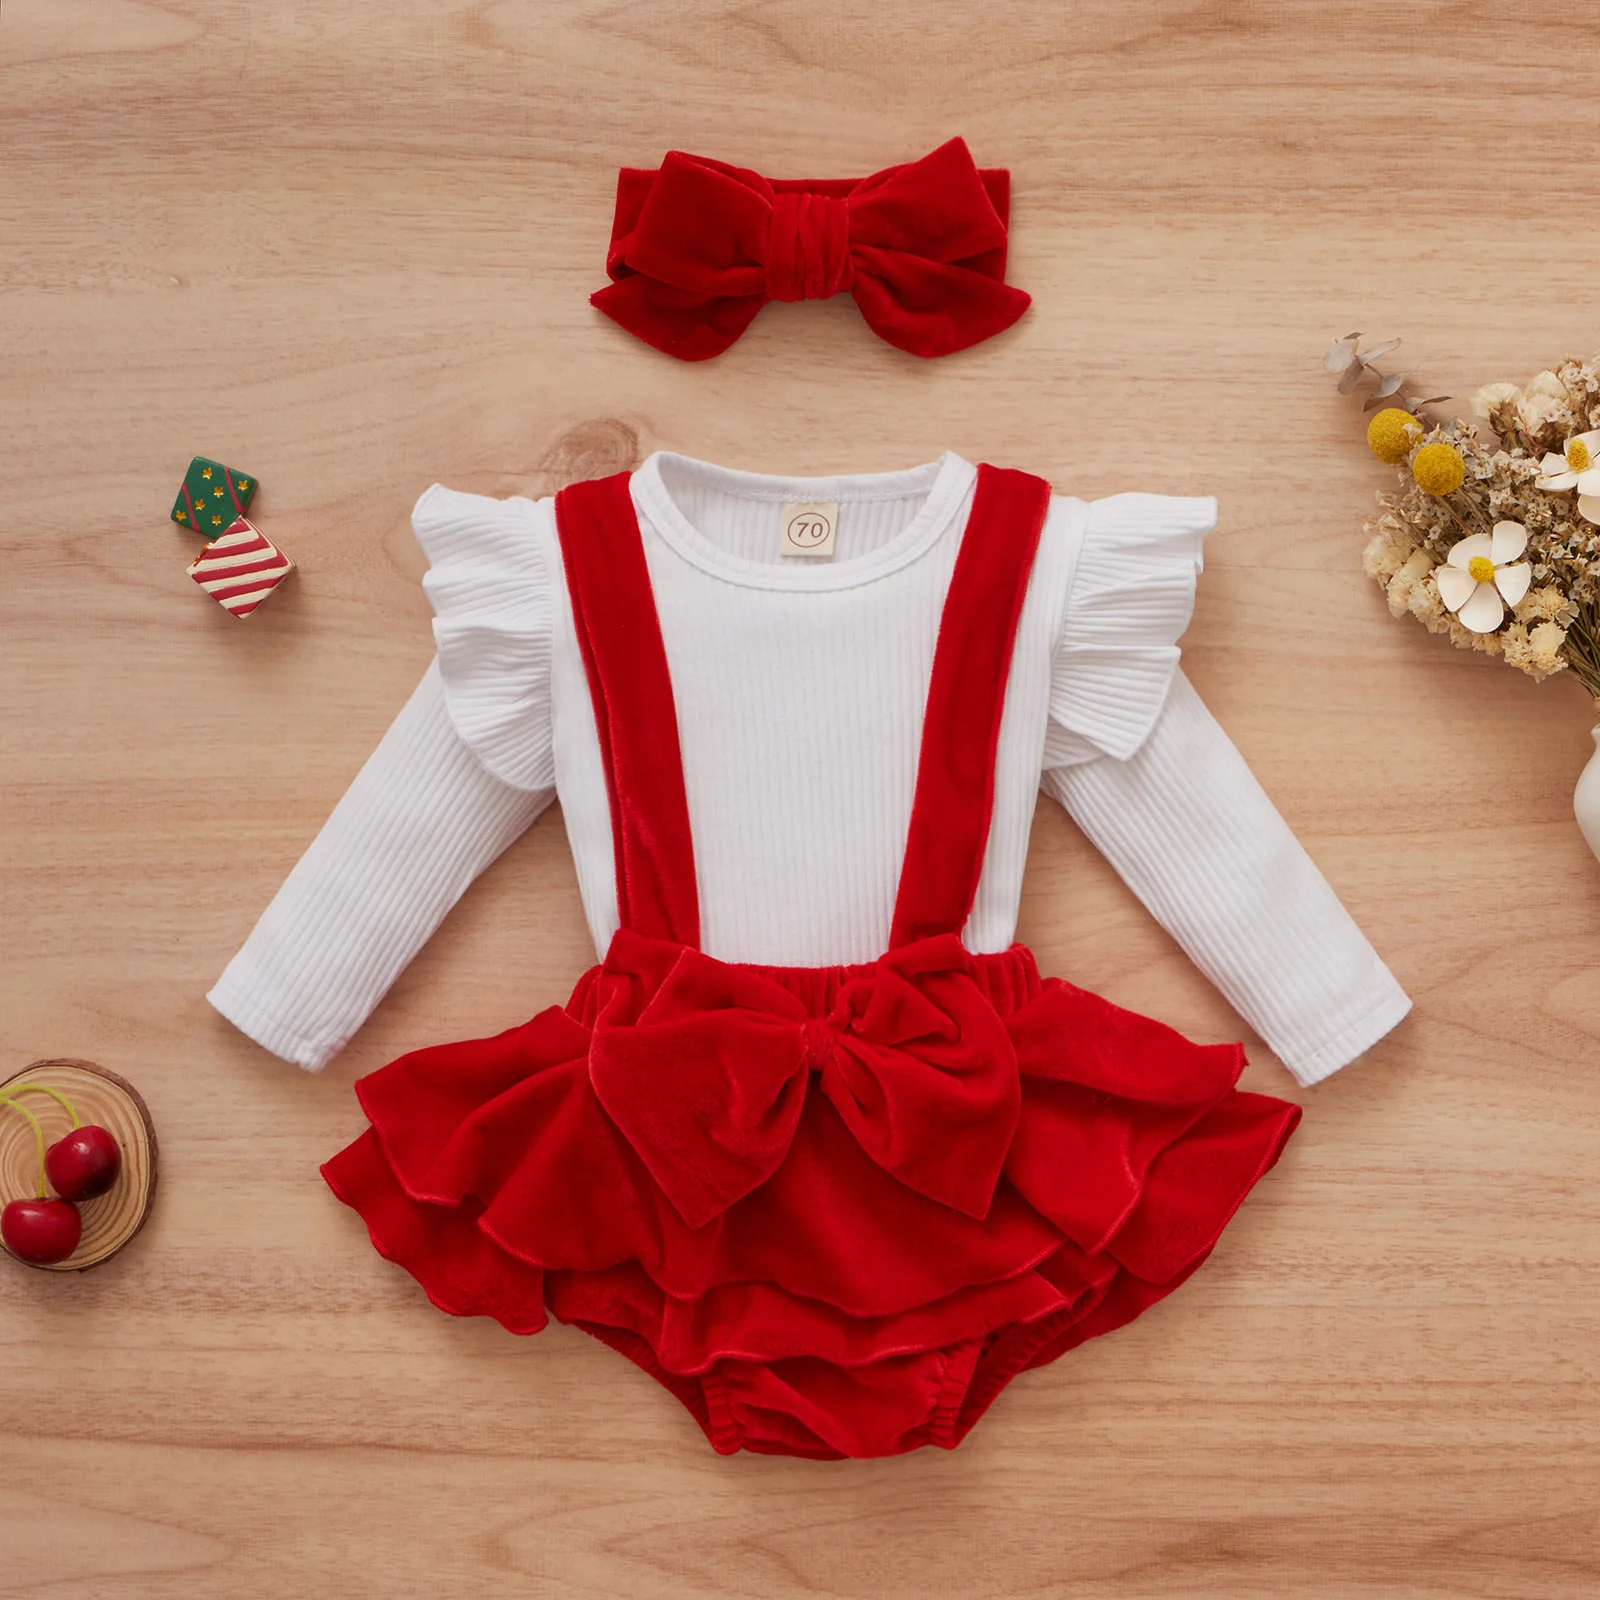 

New baby girls 3 pcs clothing set long sleeve ruffles solid rib shirt + velvet overalls skirt + headband Christmas outfits, Picture shows